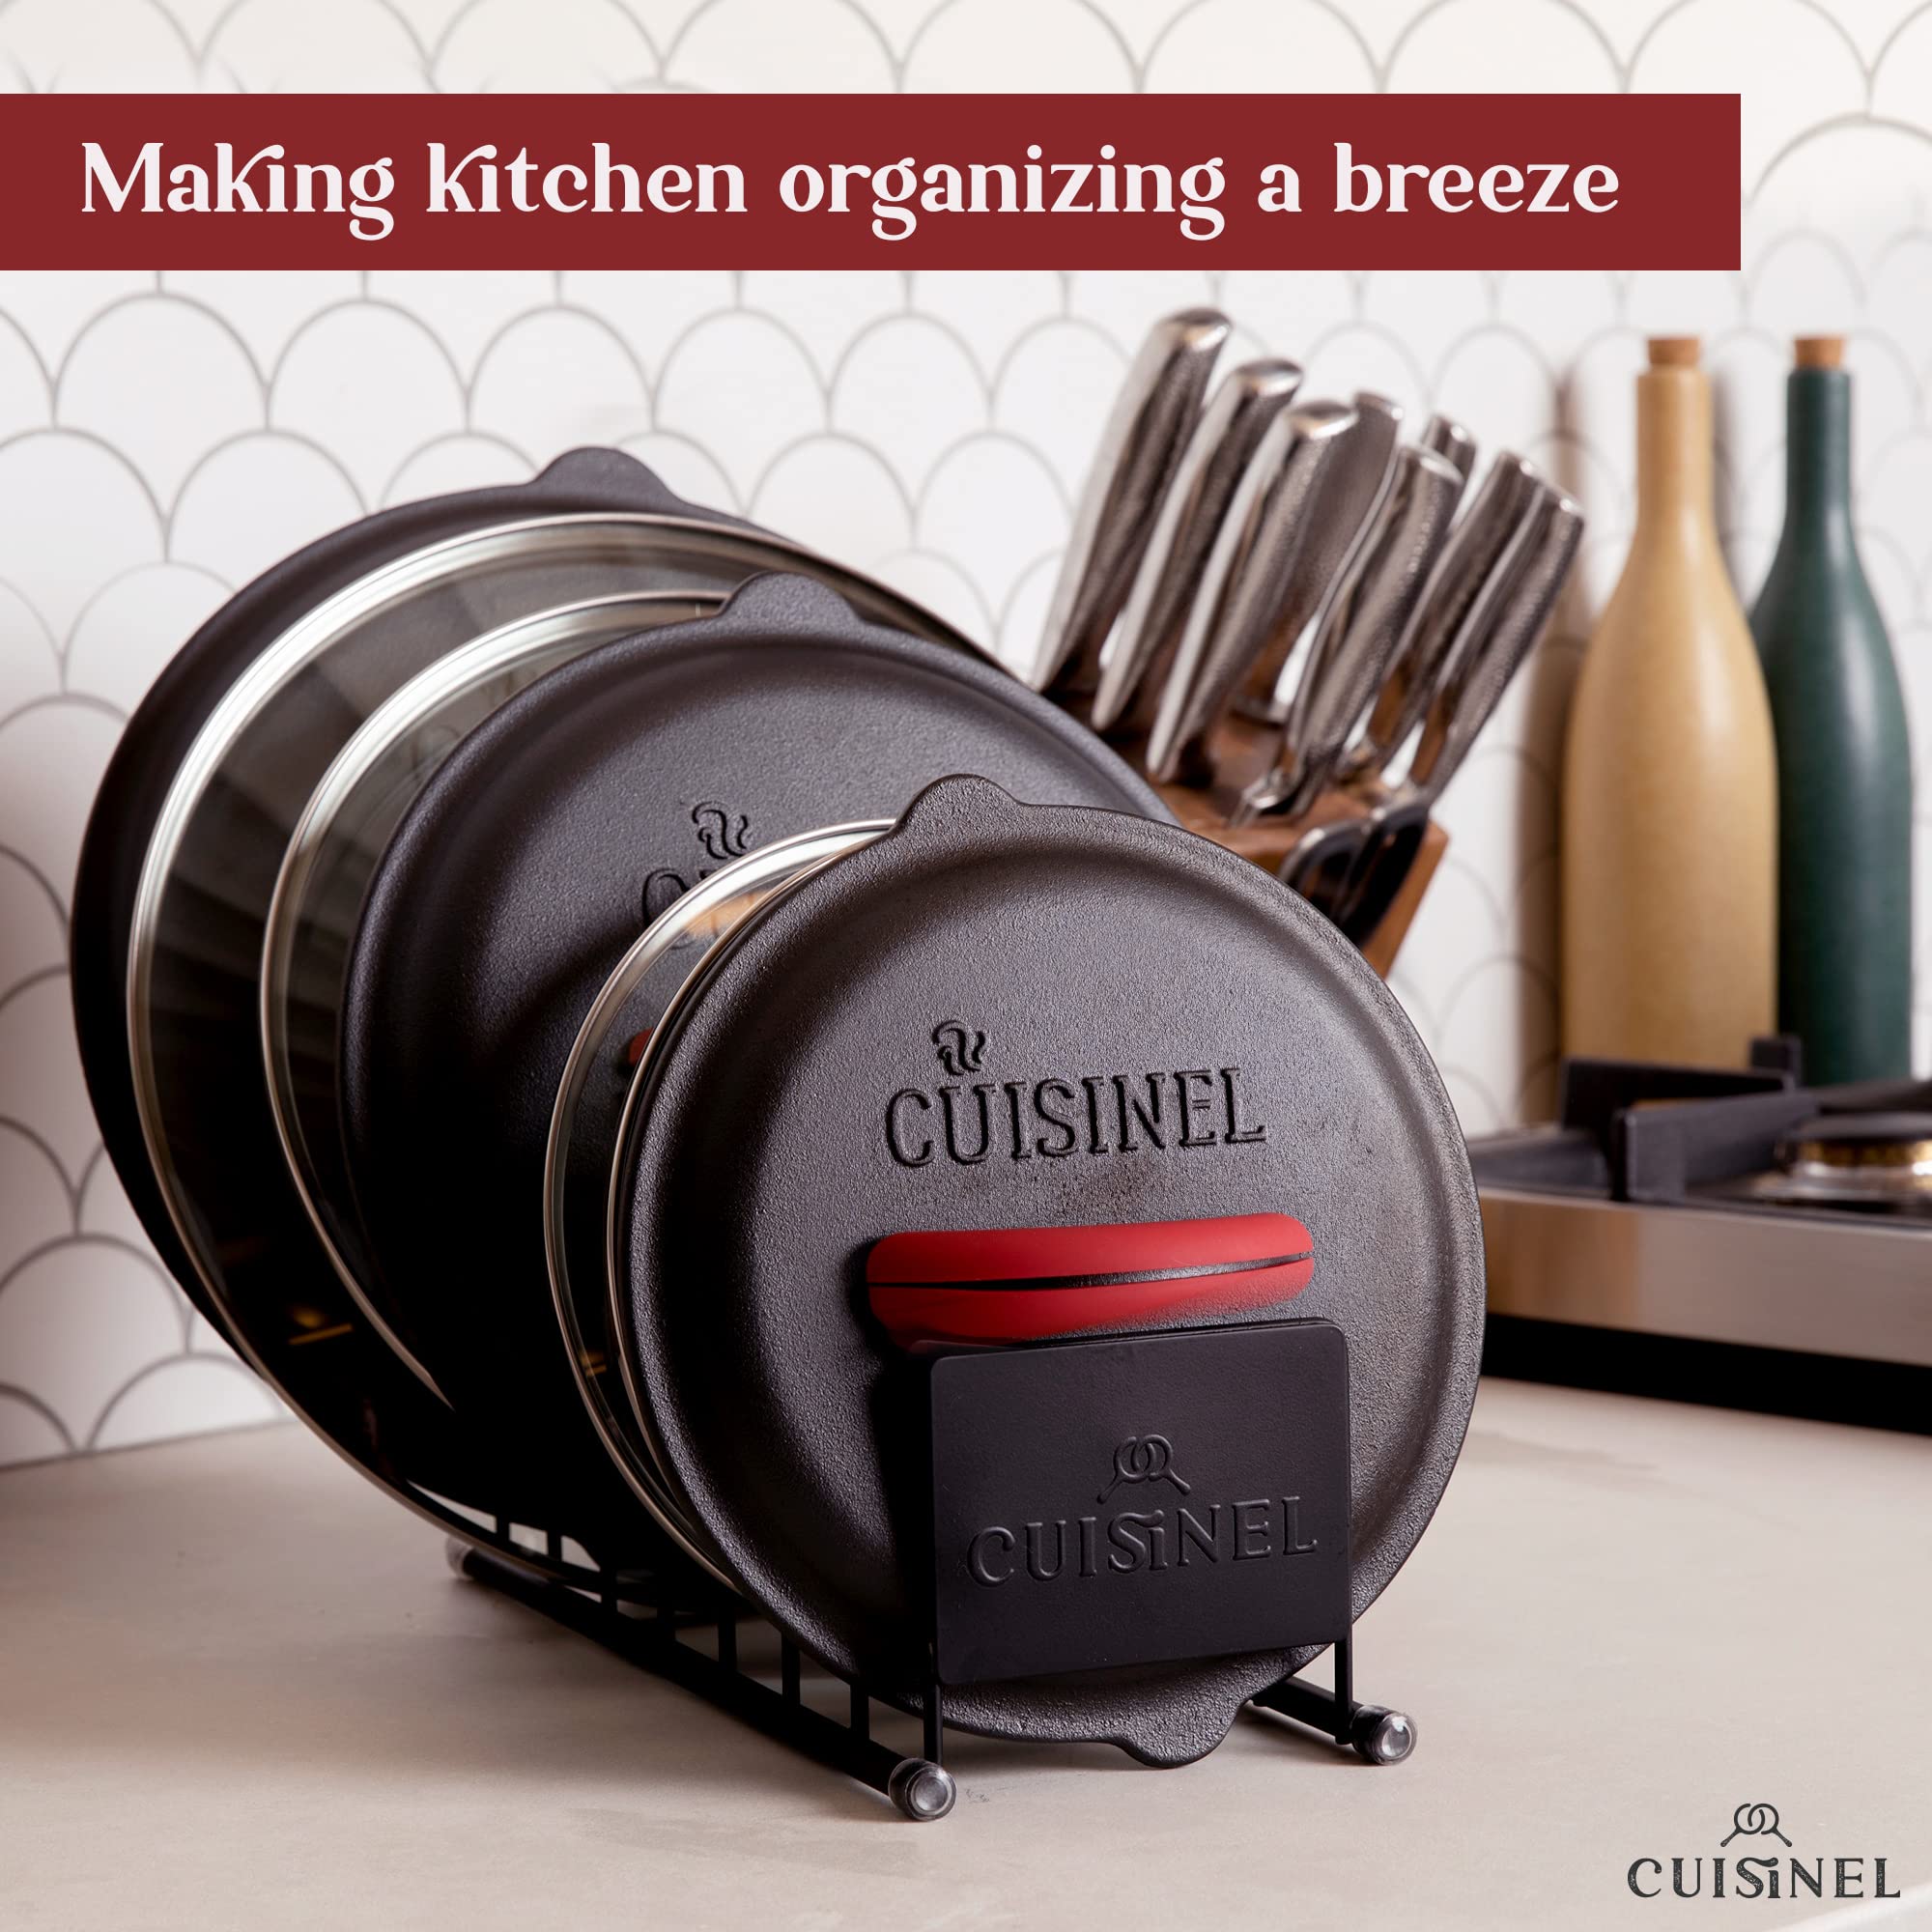 Cuisinel Heavy Duty Pan Organizer, 5 Tier Rack - Holds up to 50 LB - Holds Cast Iron Skillets, Griddles and Shallow Pots - Durable Steel Construction - Space Saving Kitchen Storage  - Good